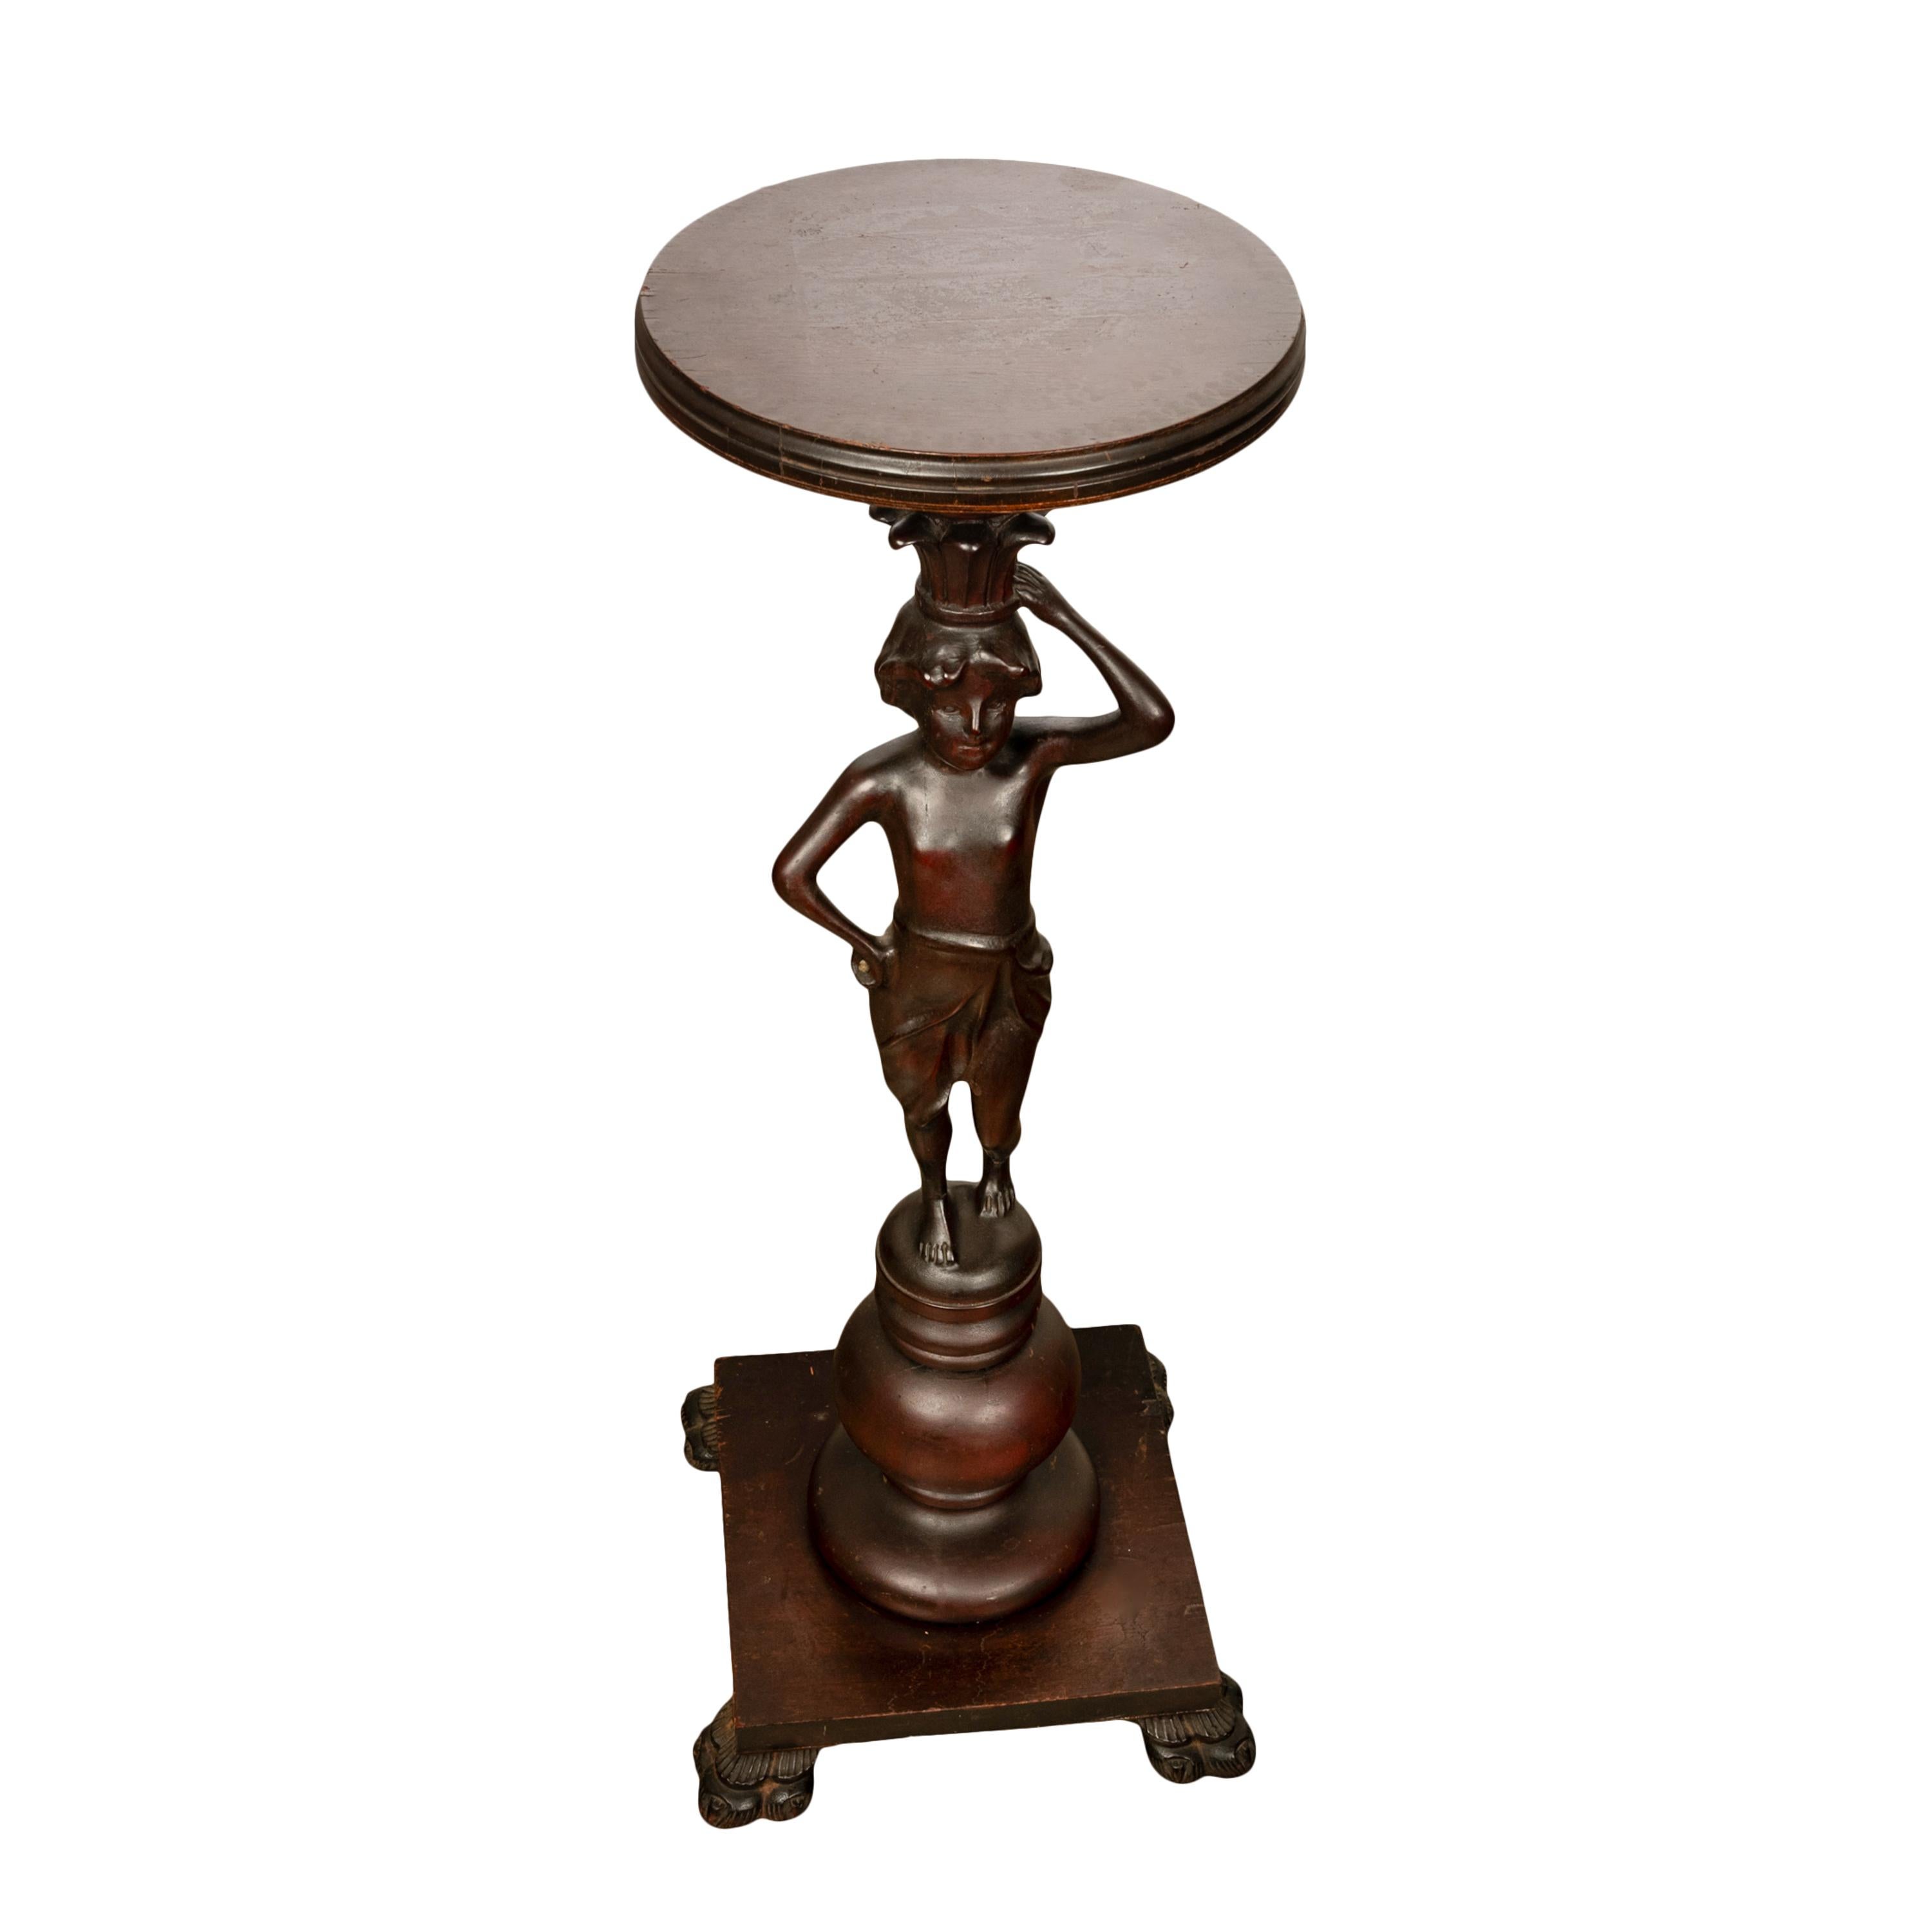 Antique Italian Carved Walnut Statue Pedestal Wine Candle Lamp Stand Table 1900 For Sale 4